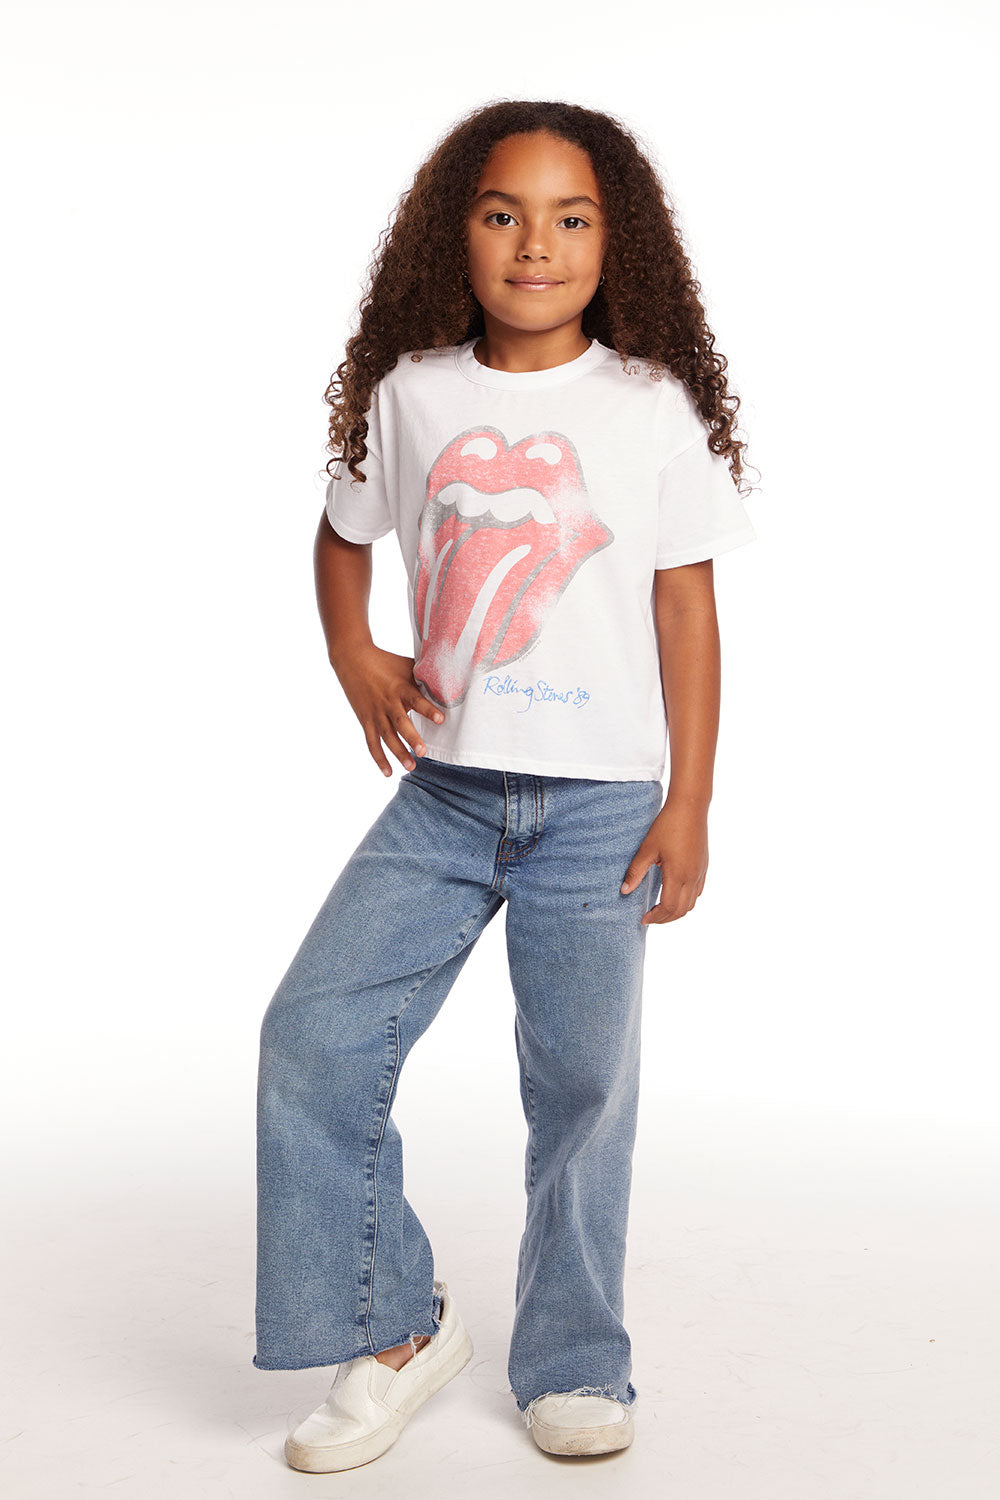 Rolling Stones Classic Logo Girls Tee GIRLS chaserbrand